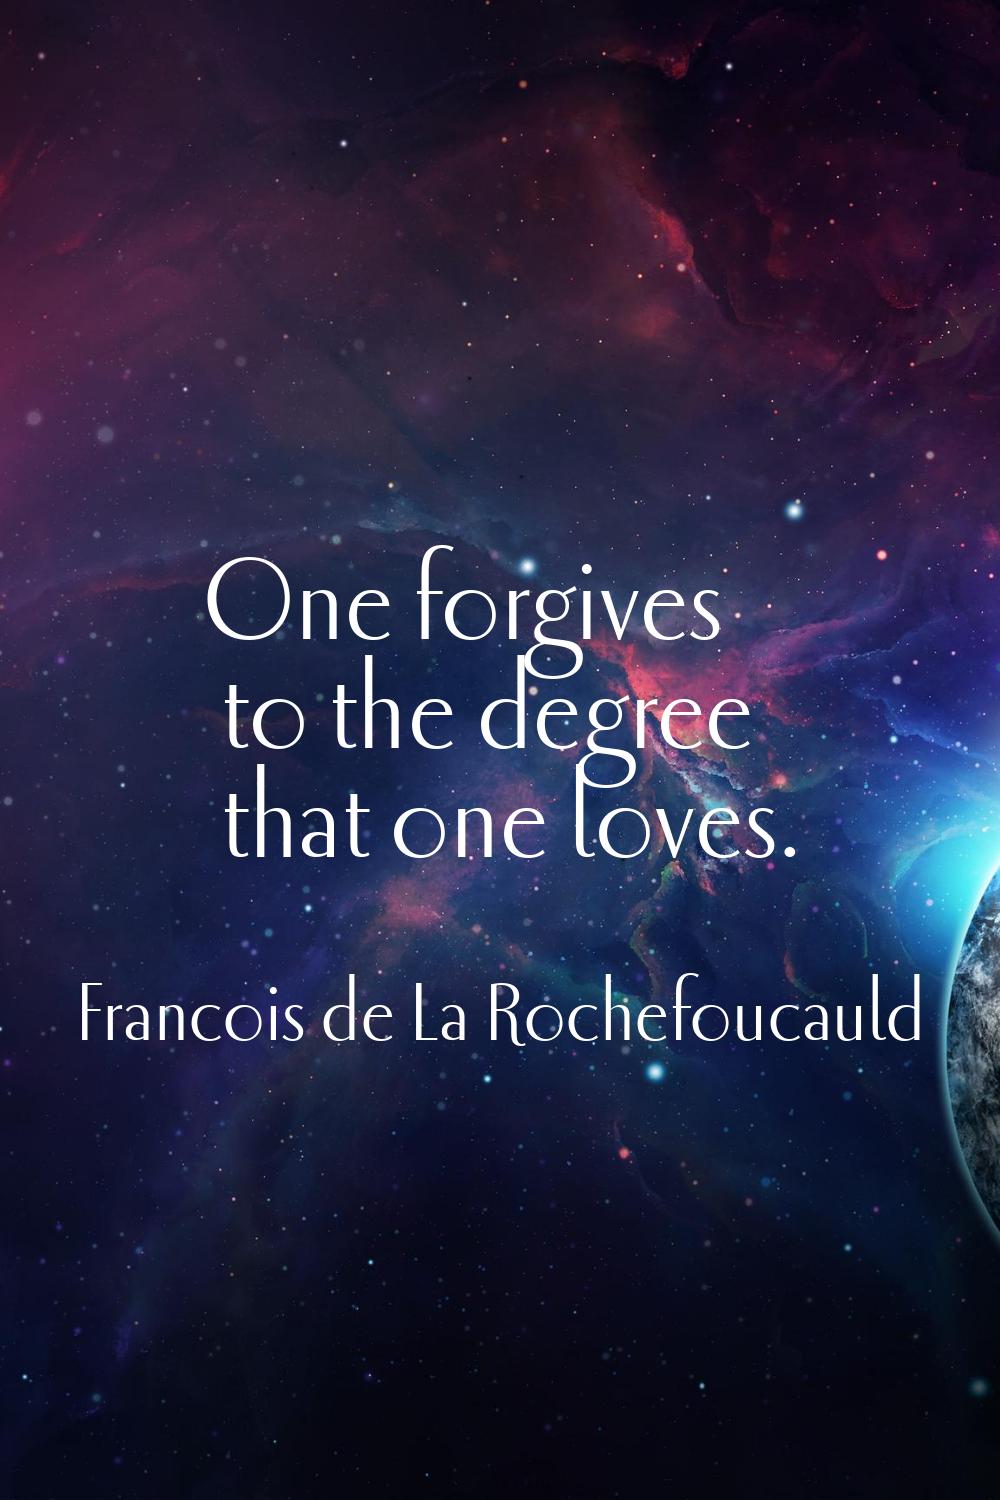 One forgives to the degree that one loves.